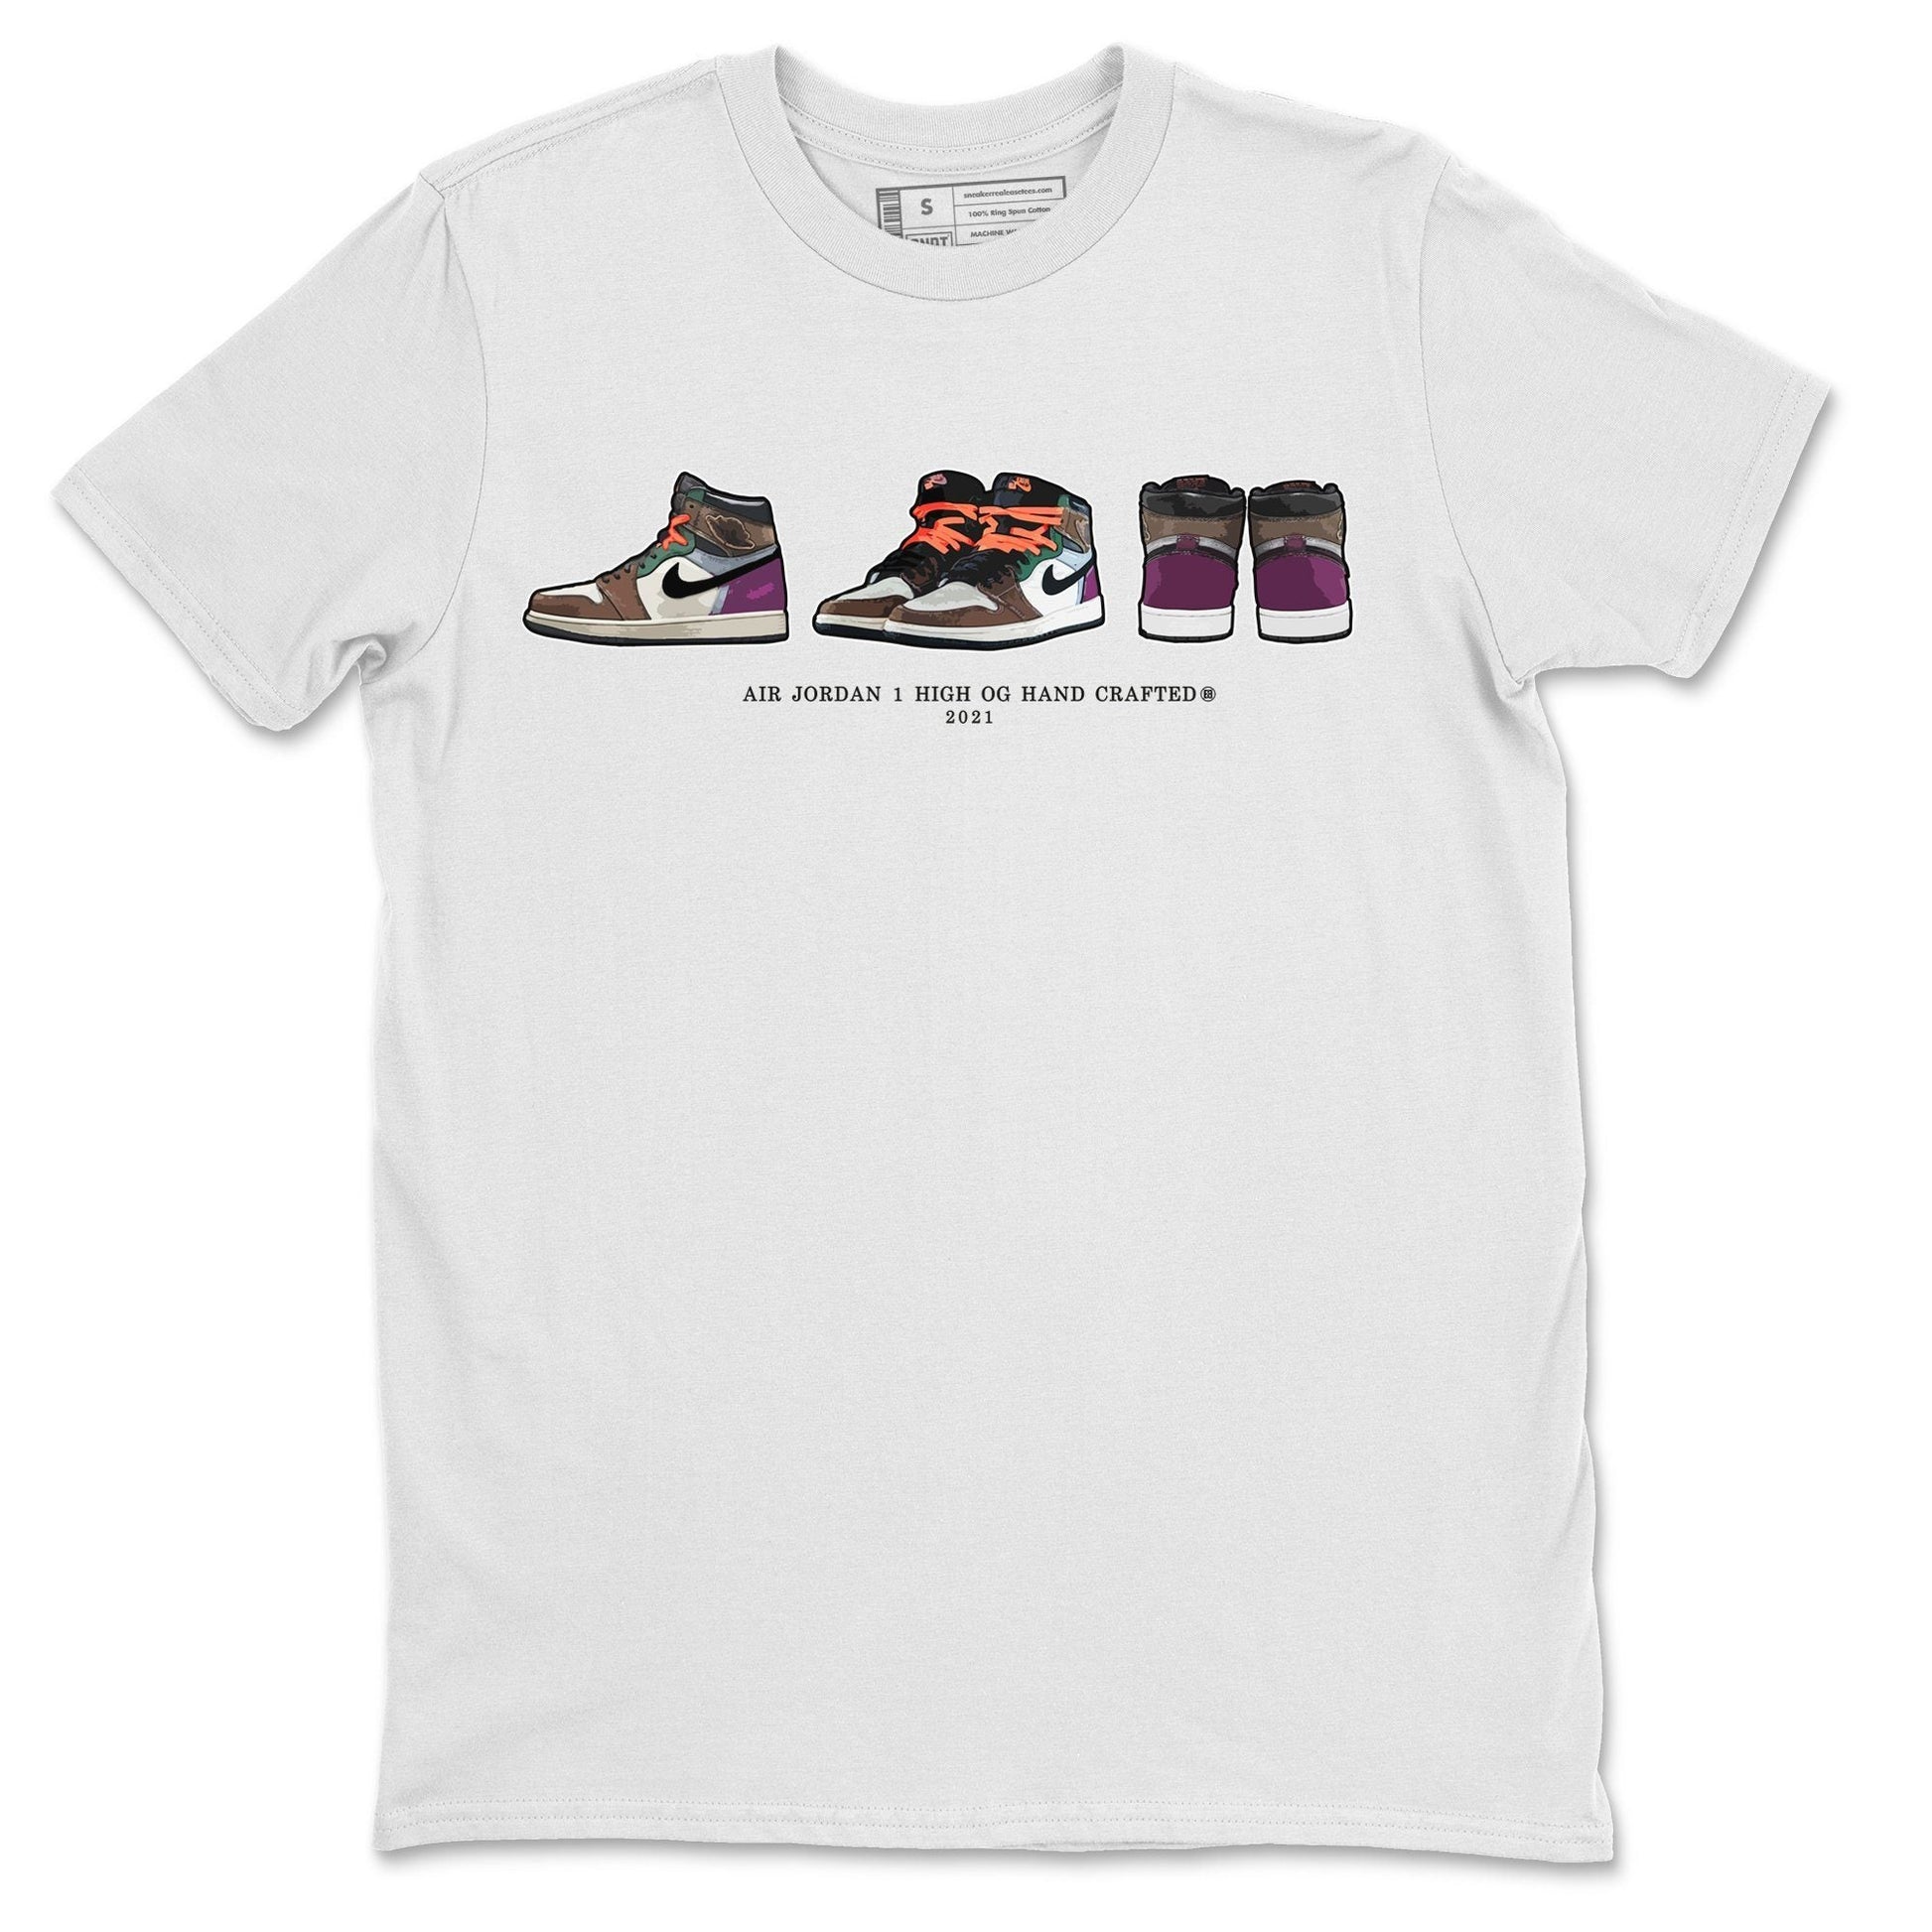 Jordan 1 Hand Crafted Sneaker Match Tees Air Jordan 1 Prelude Sneaker Tees Jordan 1 Hand Crafted Sneaker Release Tees Unisex Shirts